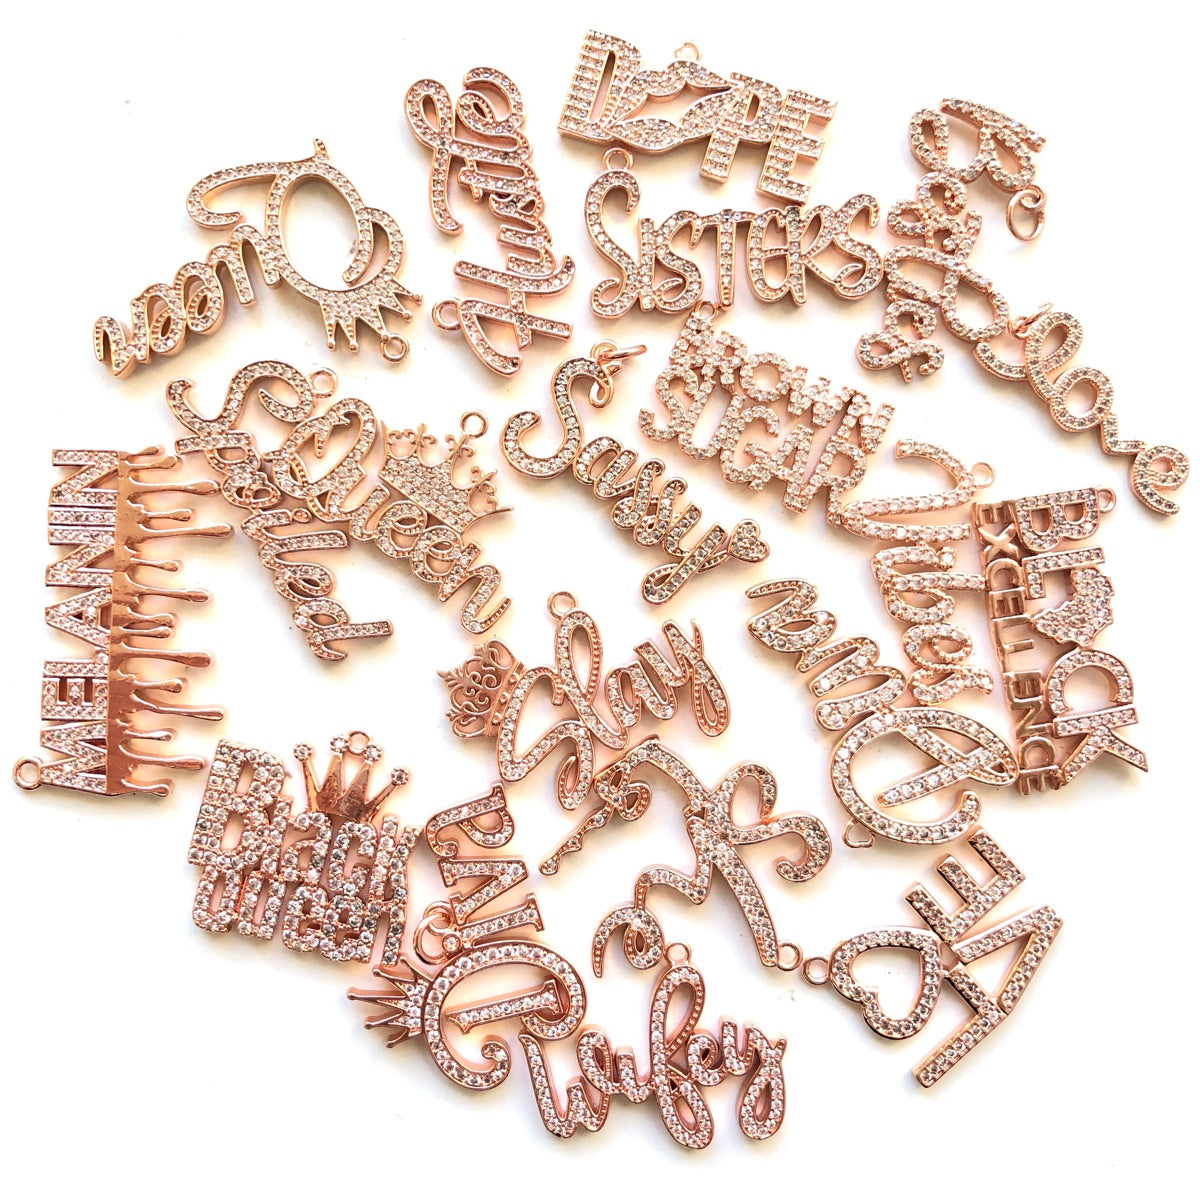 20pcs/lot Mix Diva Wifey Love Black Queen Slay... Word Charms Bundle Rose Gold CZ Paved Charms Mix Charms On Sale Charms Beads Beyond